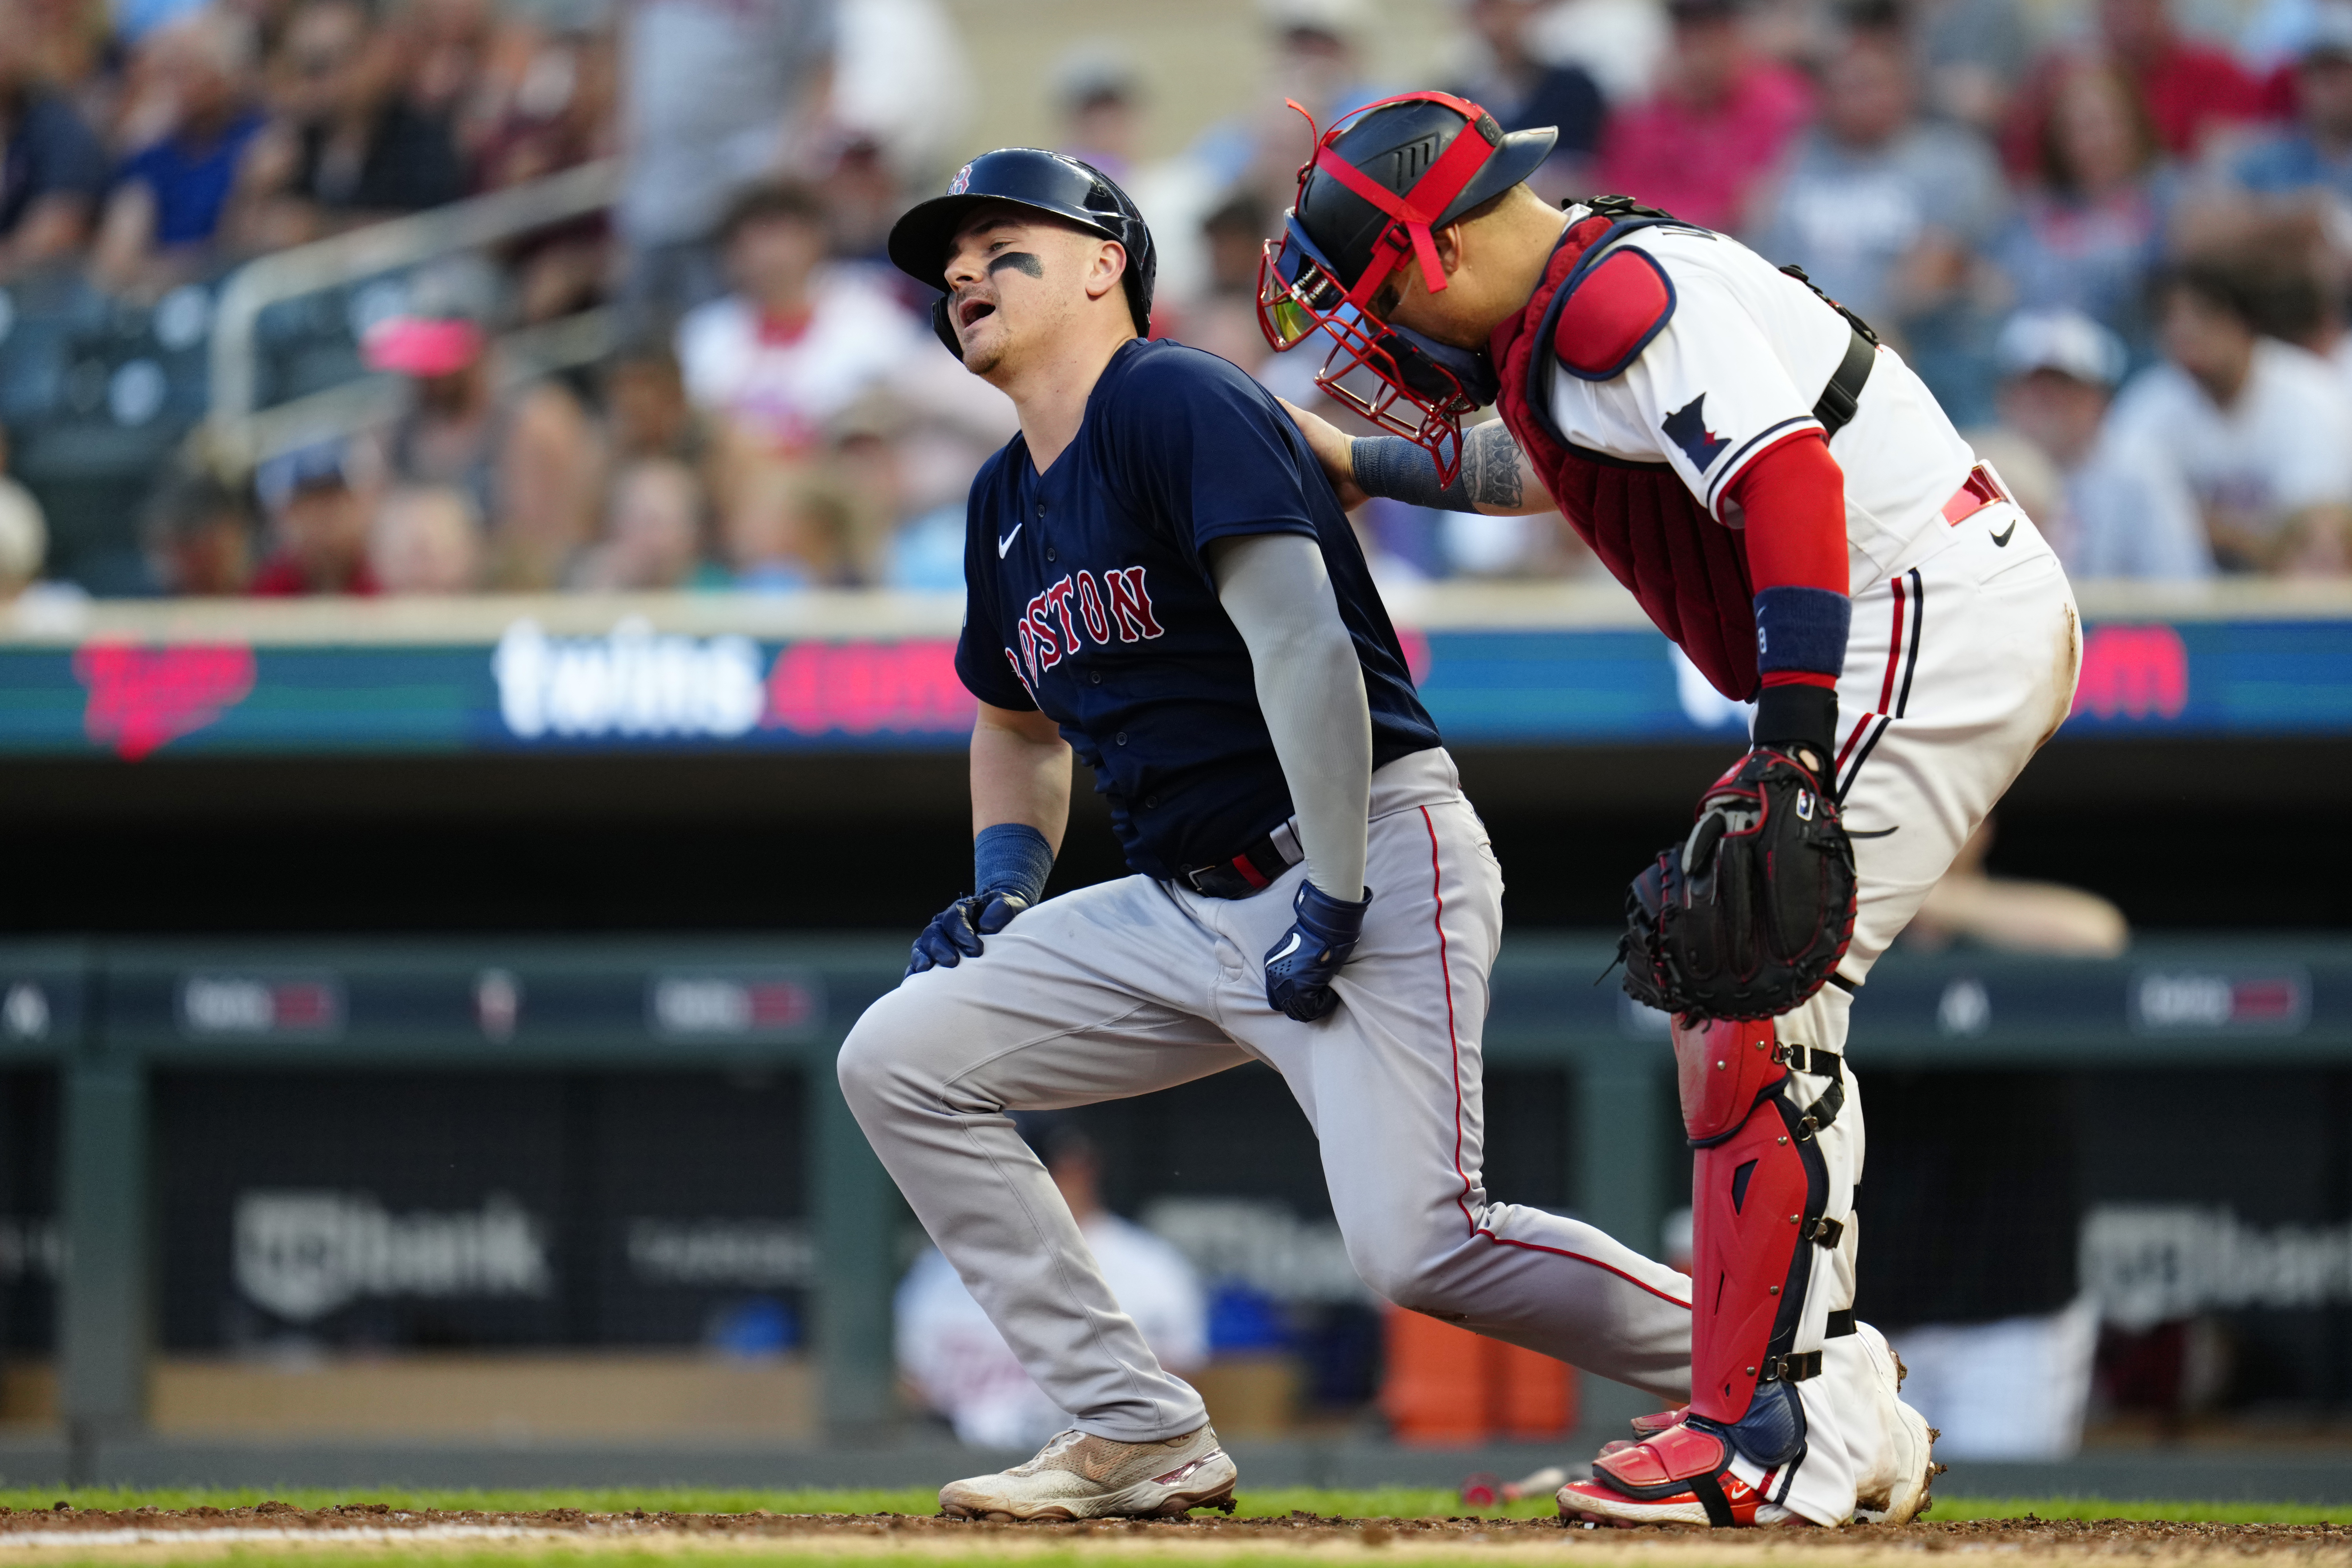 Verdugo, Duran propel Red Sox to fourth straight win